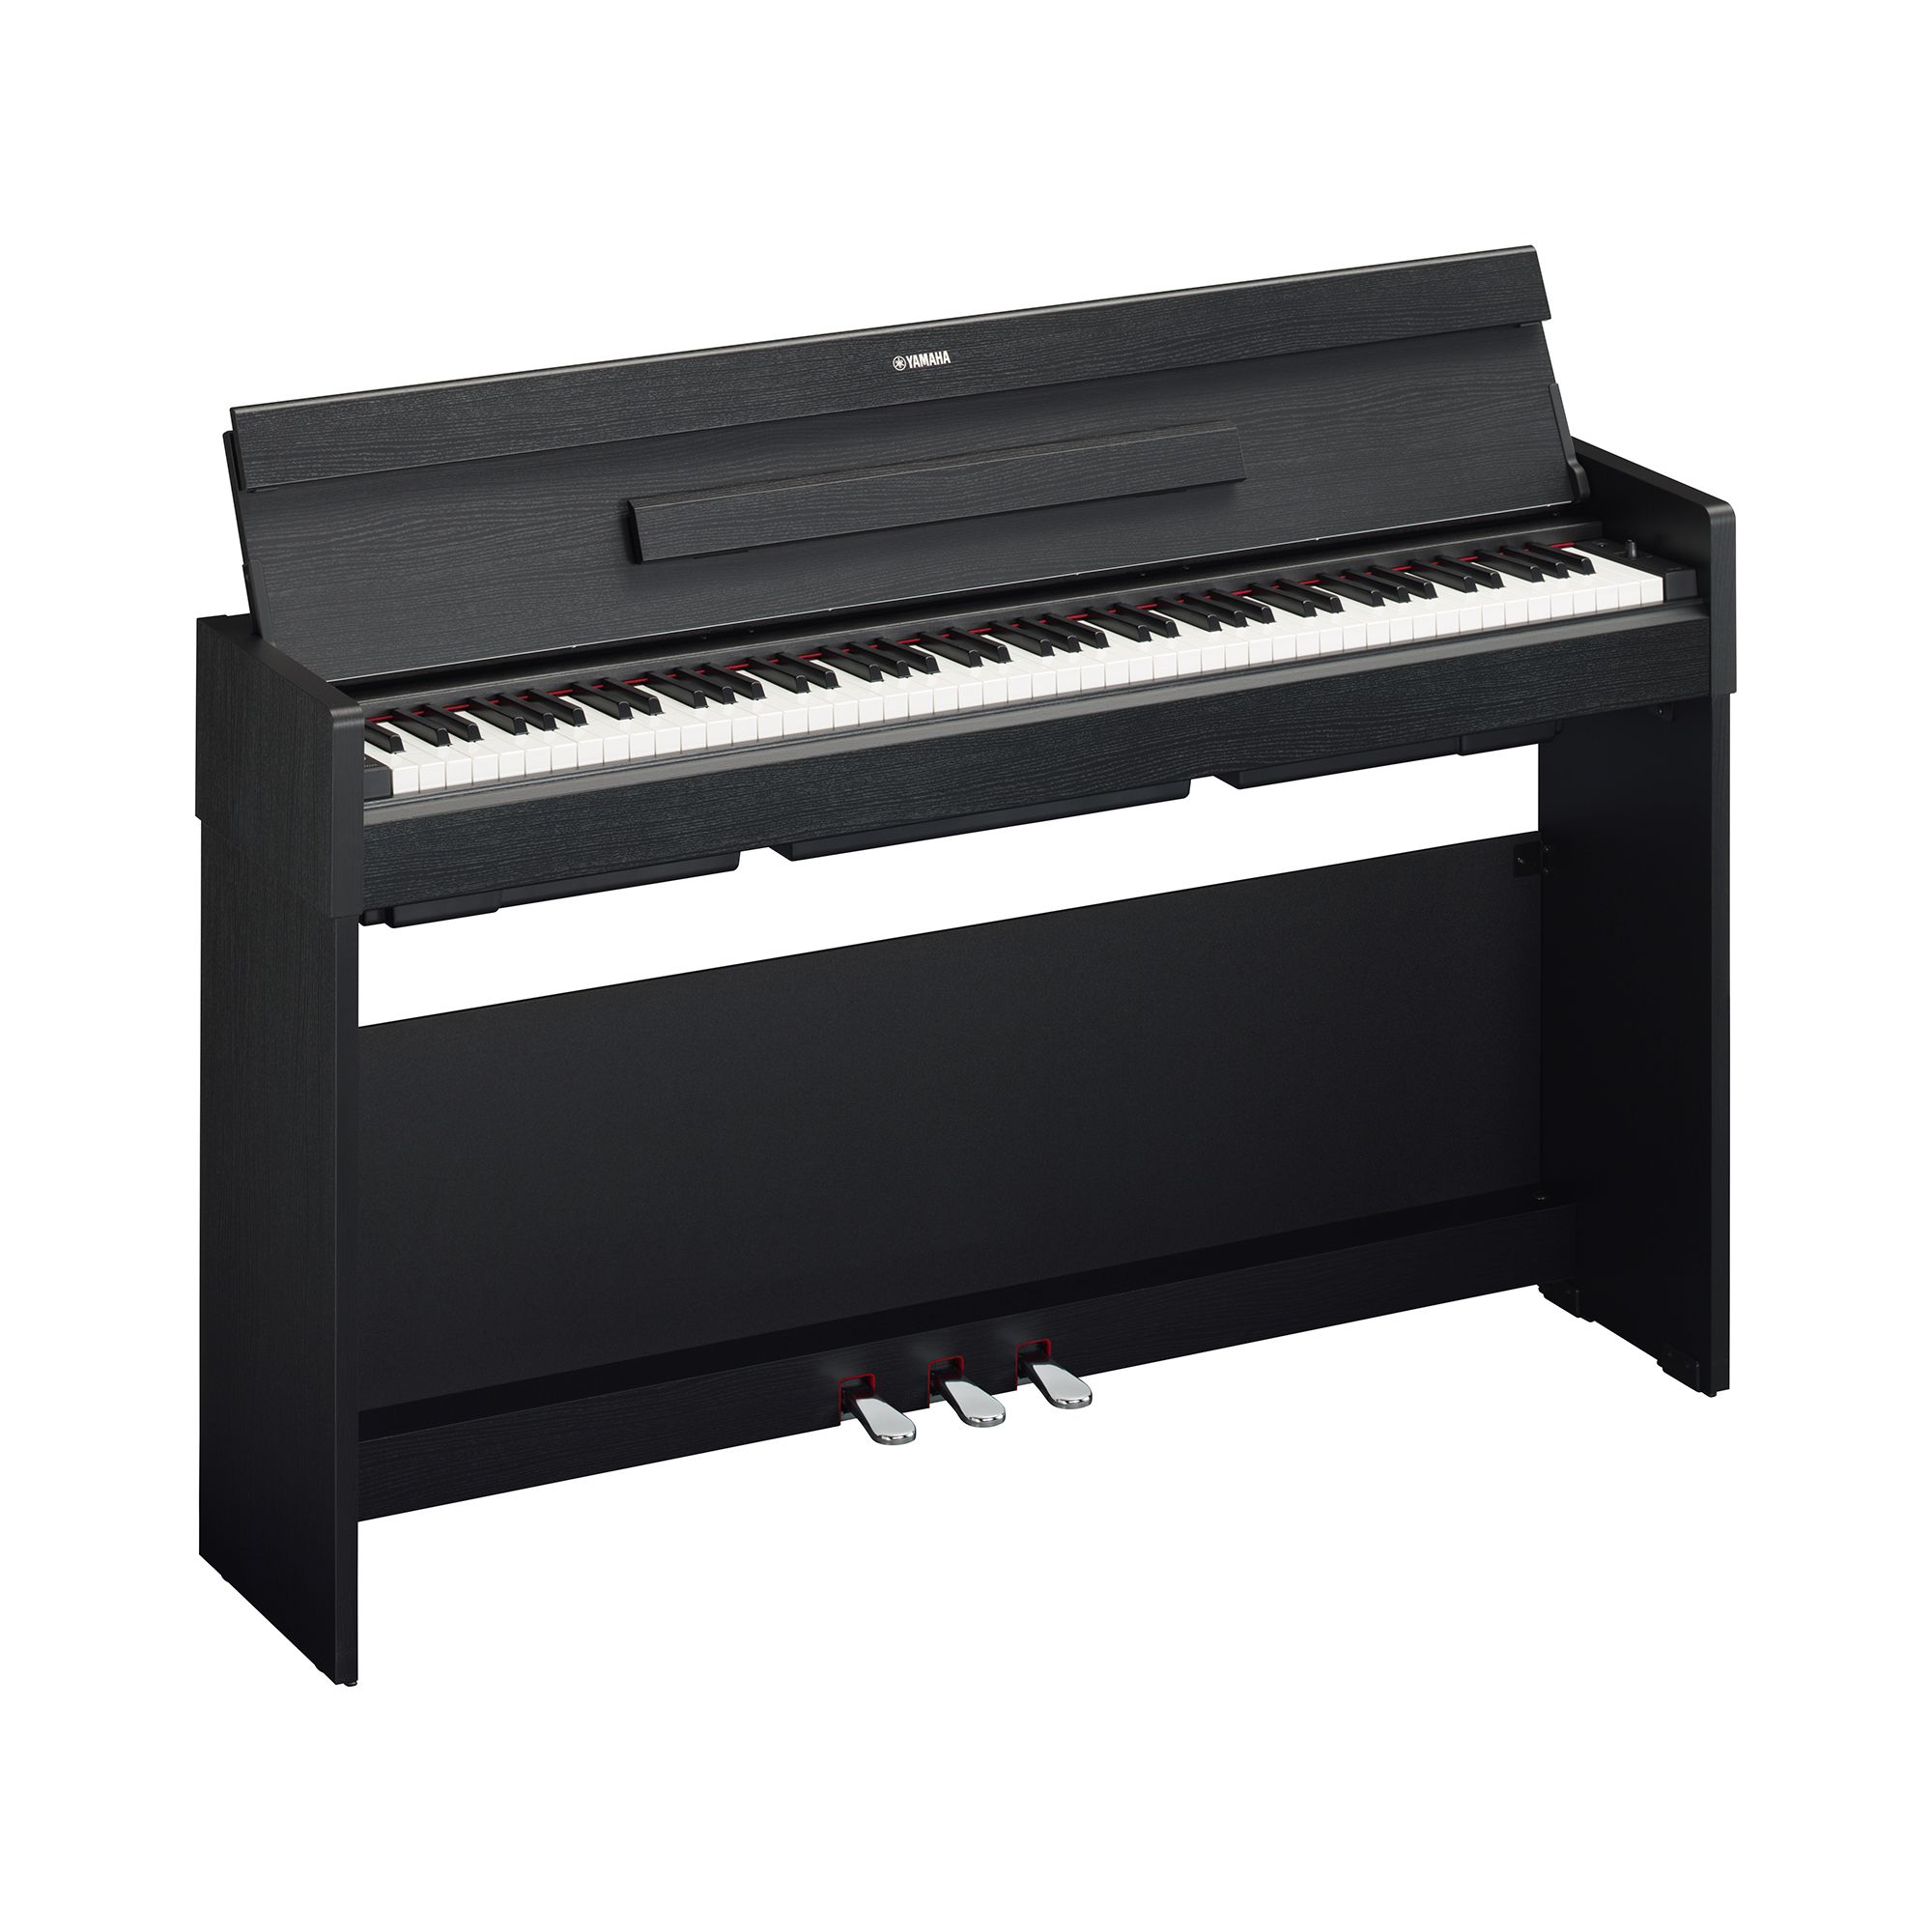 YDP-105 - Overview - ARIUS - Pianos - Musical Instruments 